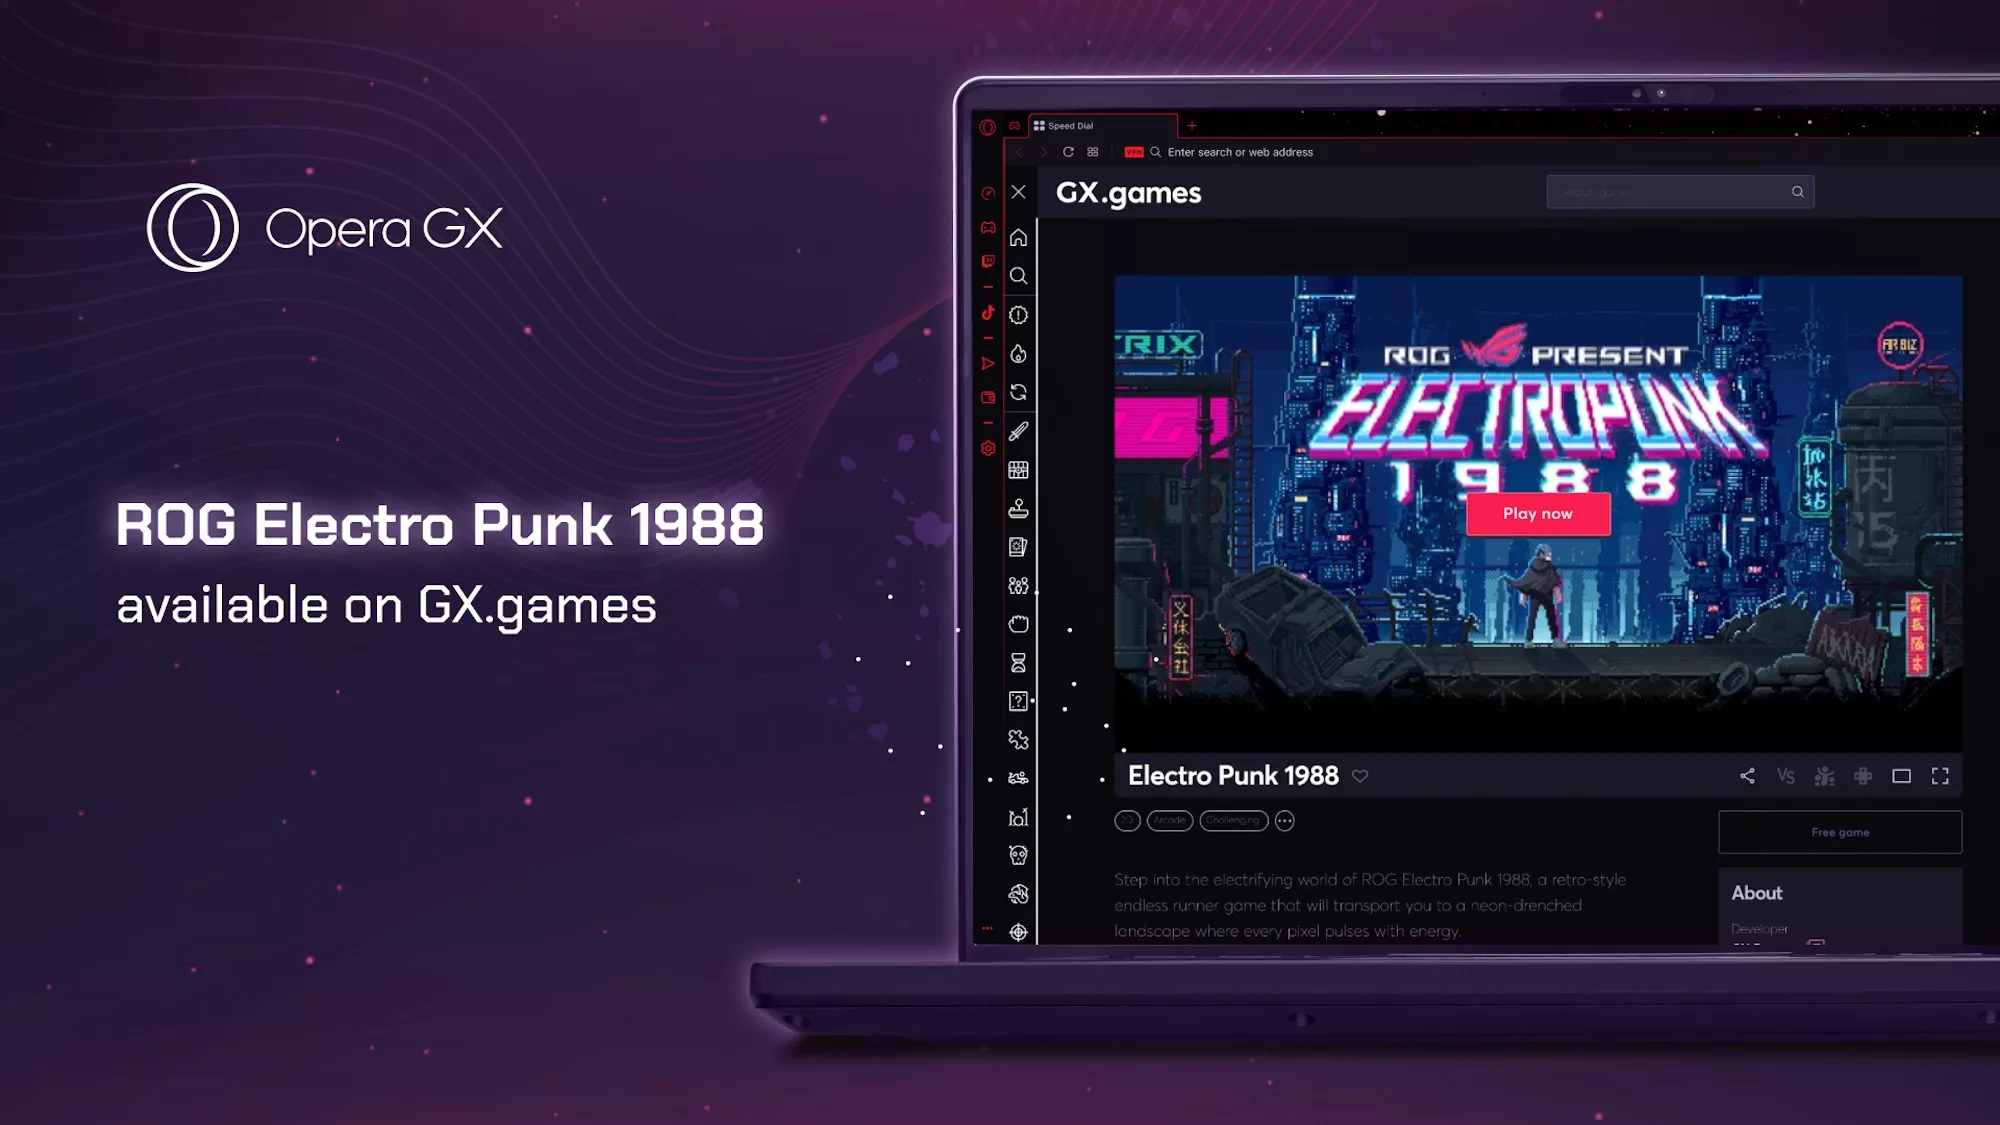 An infographic showing that the ROG Electro Punk 1988 game is available on gx.games through the Opera GX browser